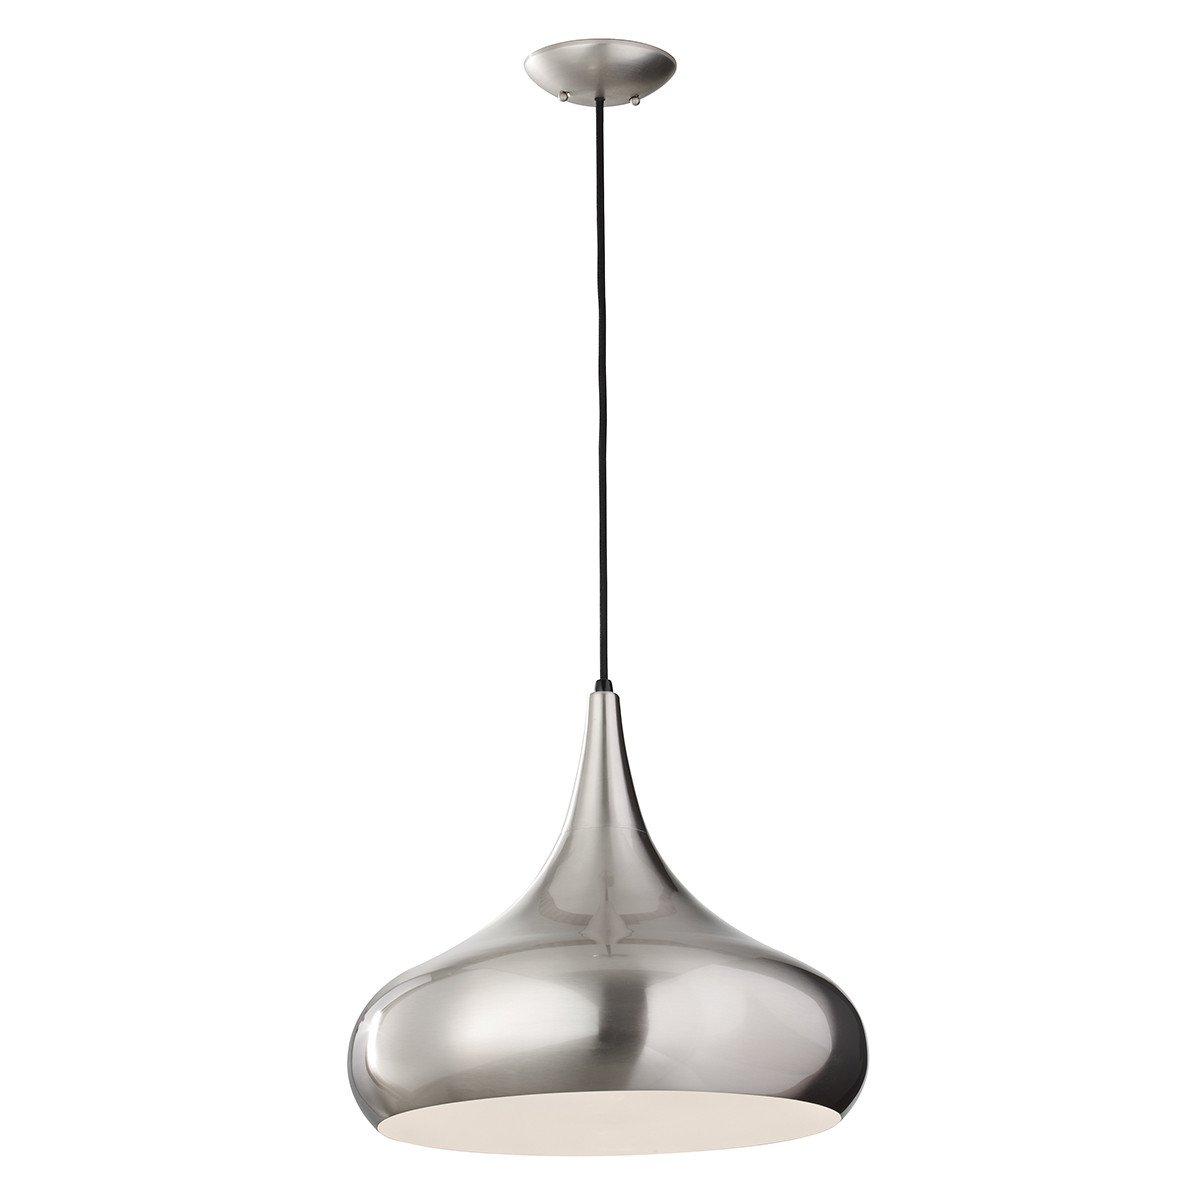 Beso 1 Light Large Dome Ceiling Pendant Brushed Steel E27